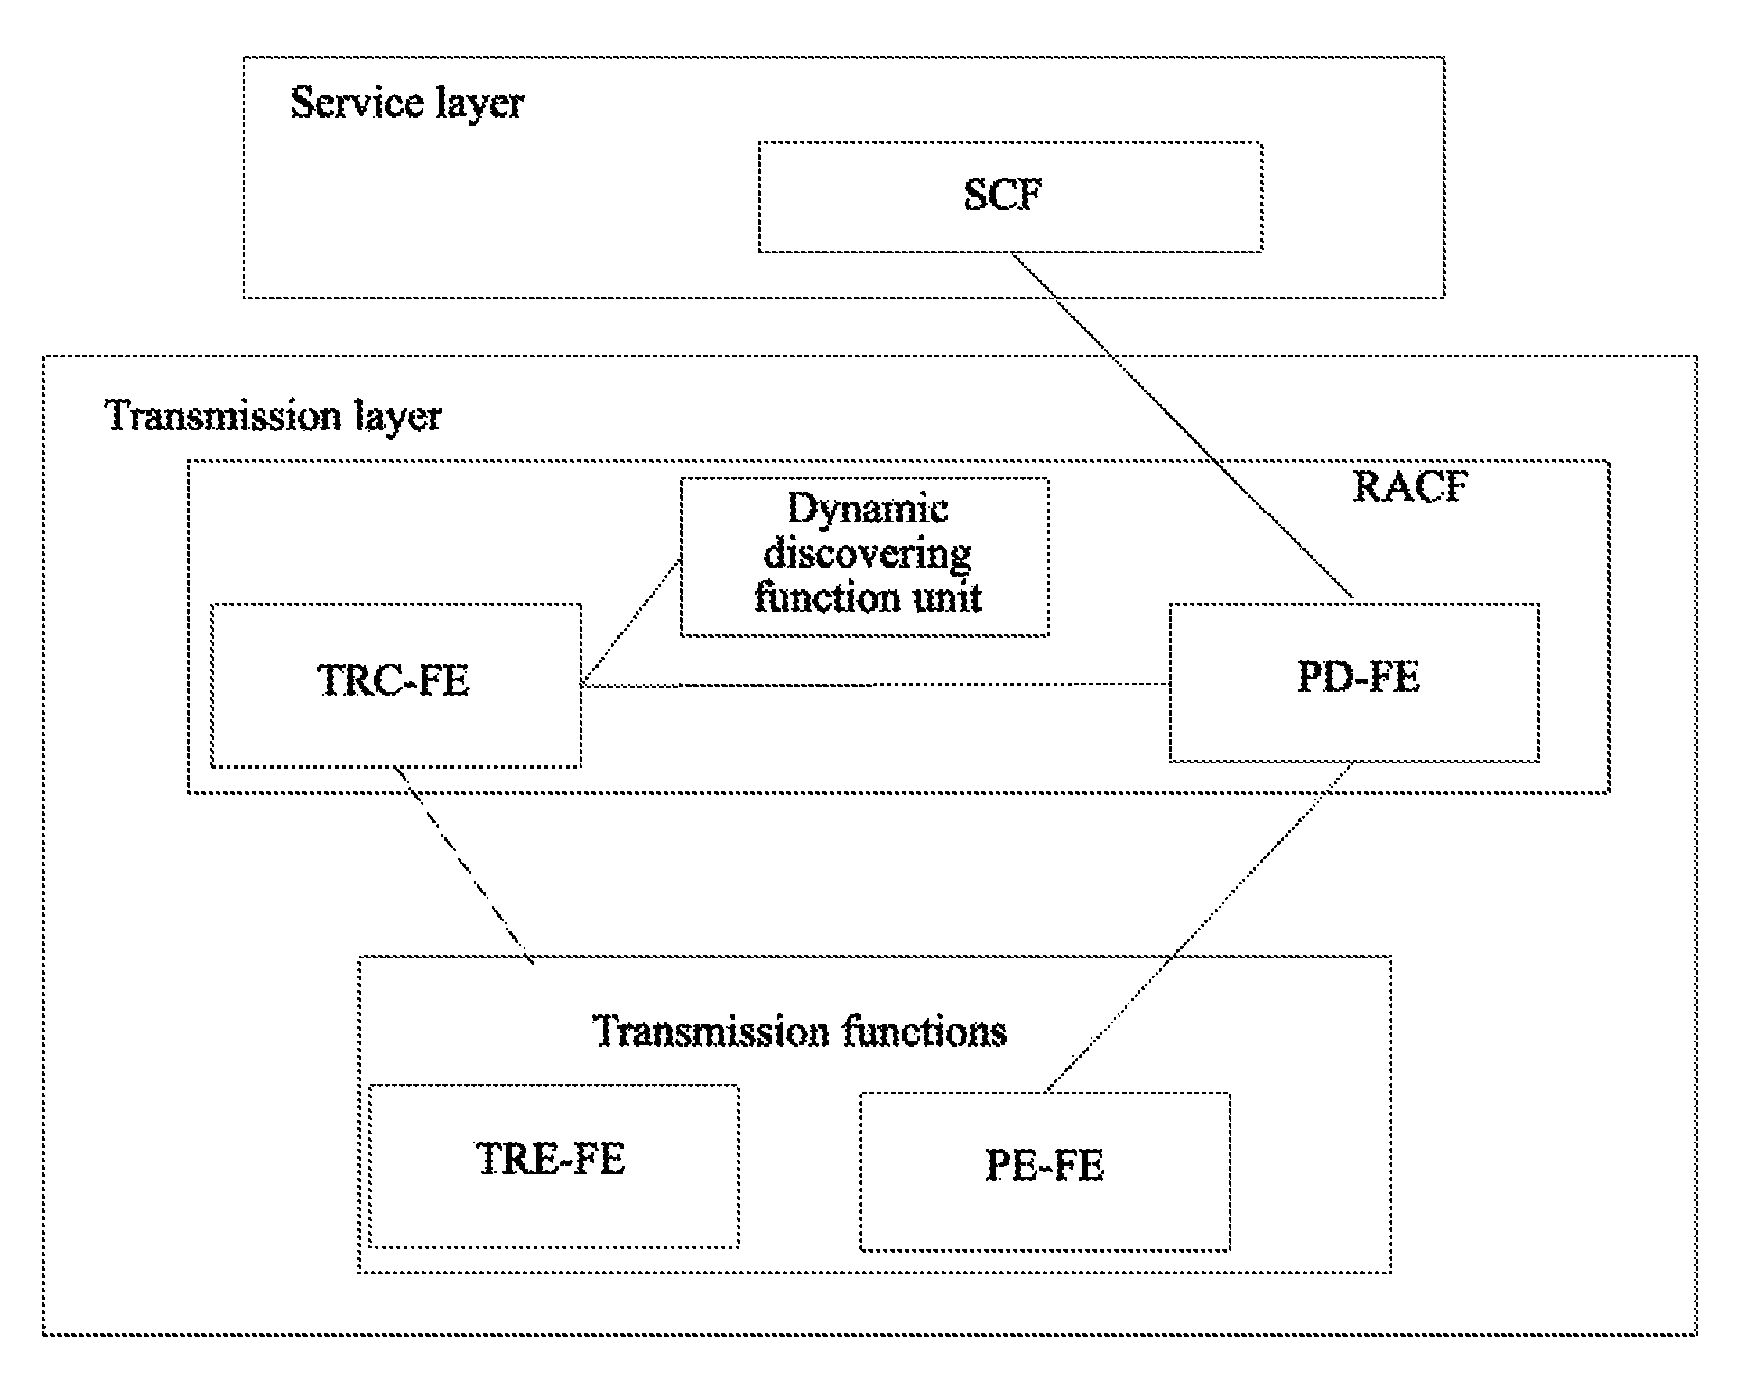 RACF system and equipment having dynamic discovering function in next generation network